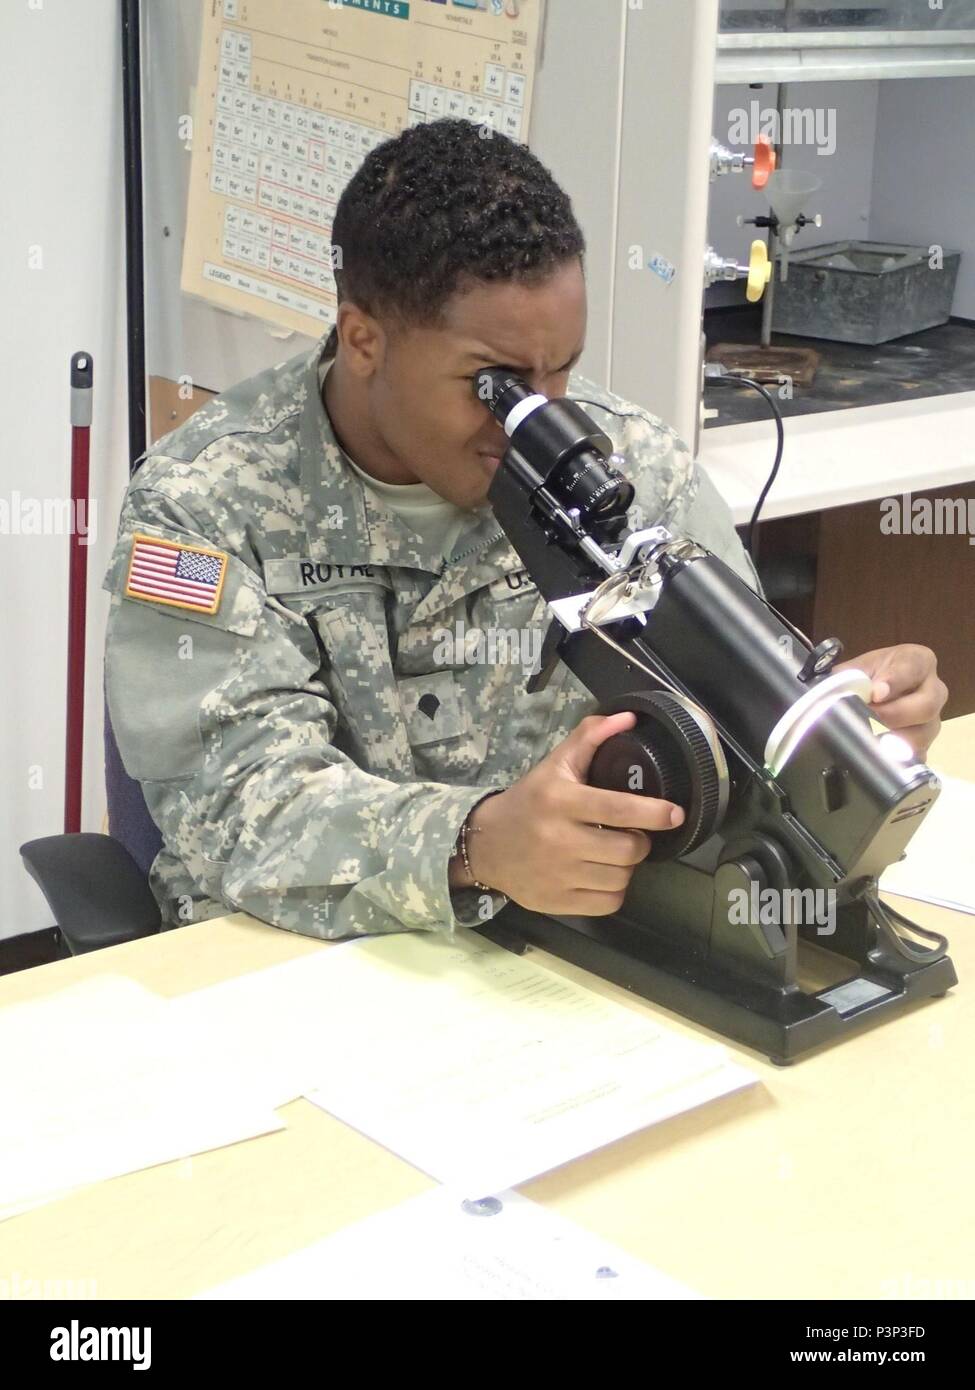 Spc. Trayon  Royal from Company A, 48th Combat Support Hospital out of Fort Story, Va., checks a patient’s eyeglass prescription during Greater Chenango Cares, July 22, 2016.  Greater Chenango Cares is one of the Innovative Readiness Training events which provides real-world training in a joint civil-military environment while delivering world-class medical care to the people of Chenango County, N.Y., from July 15-24. Stock Photo